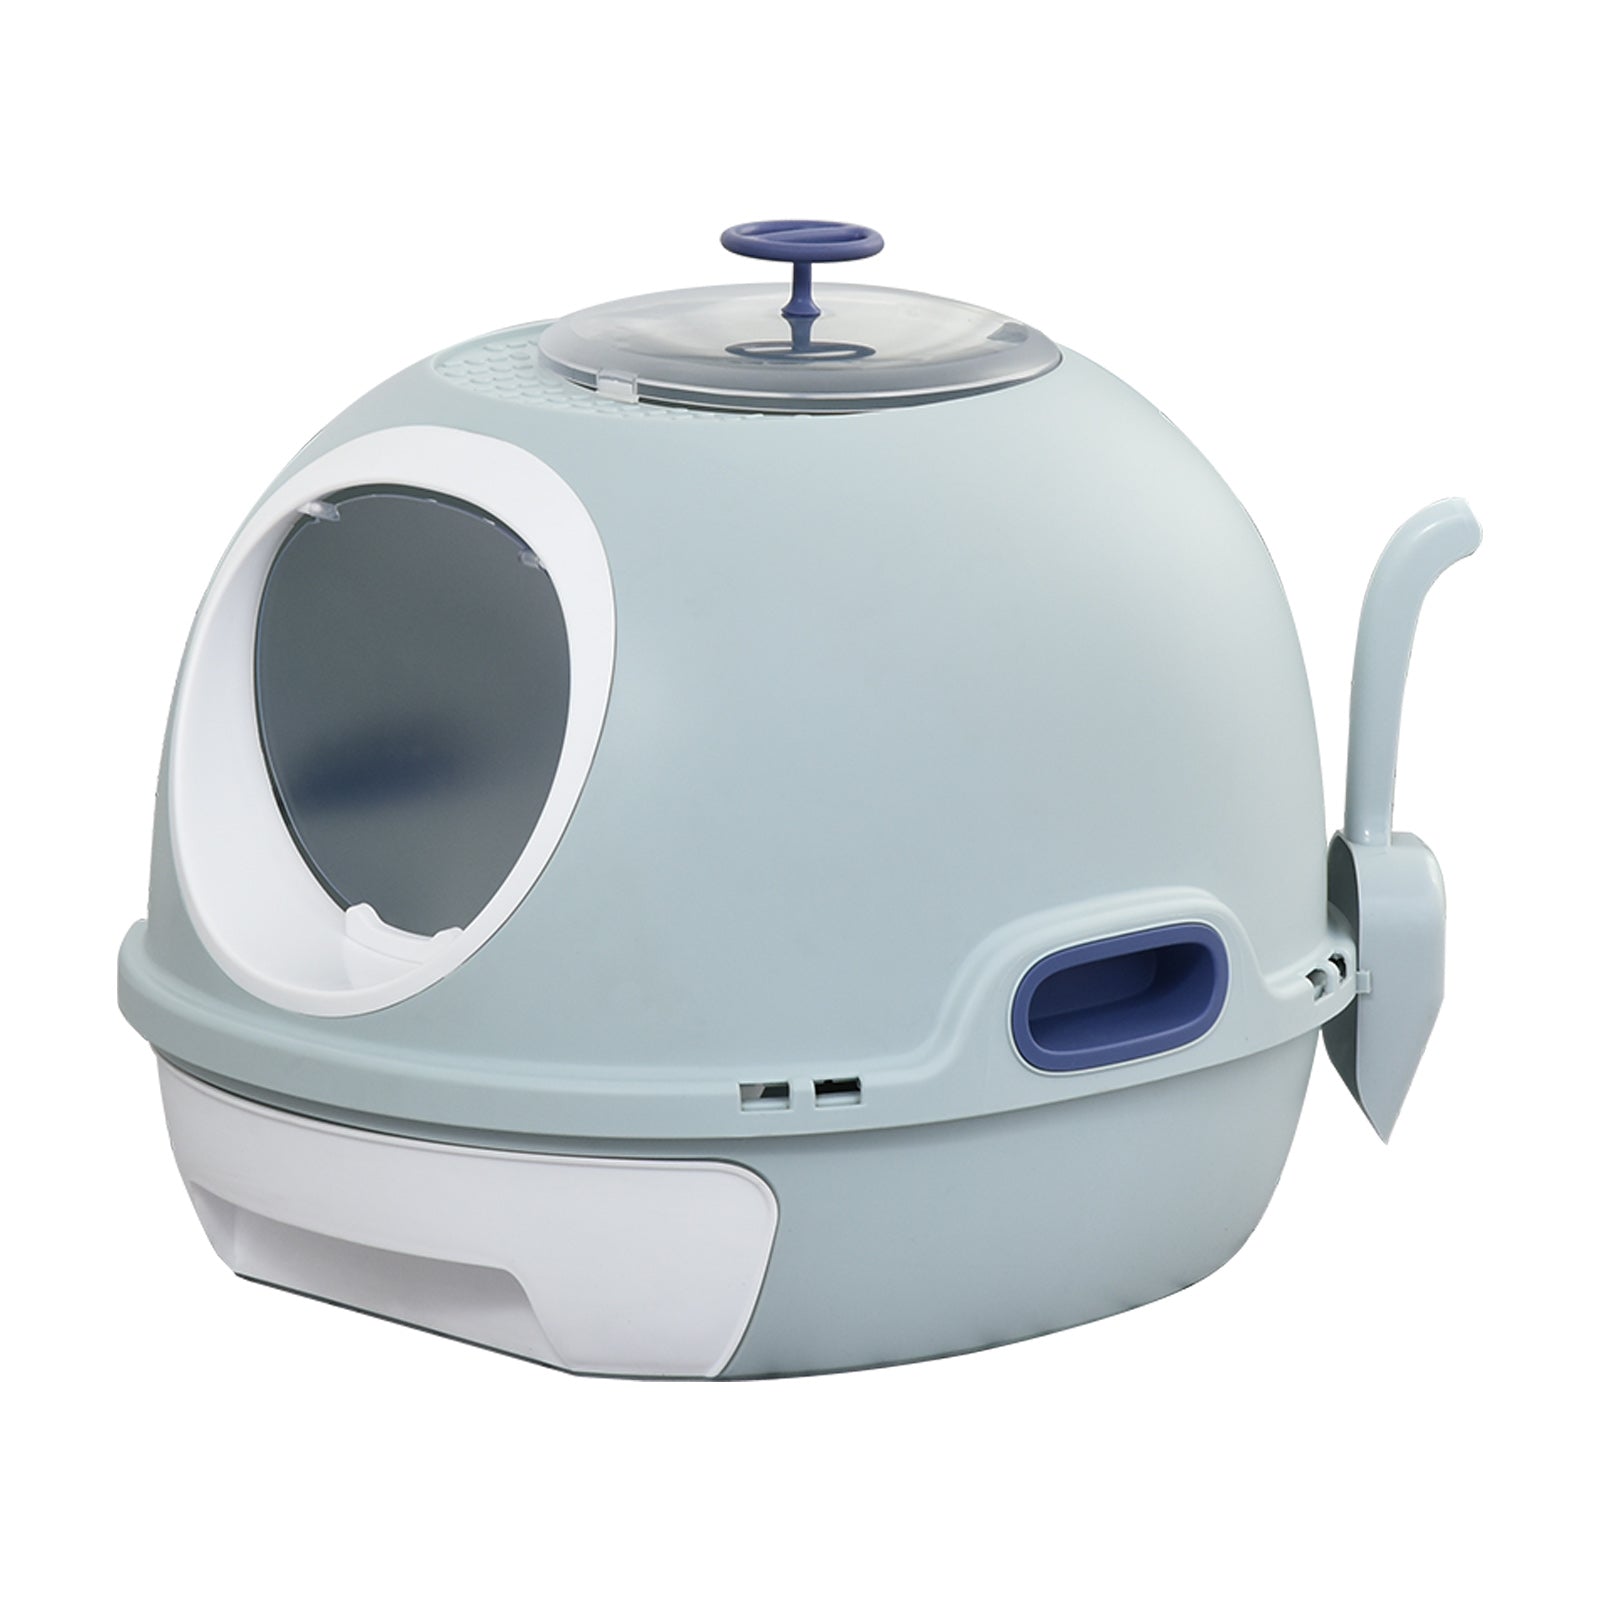 Cats Rooftop Plastic Easy Clean Litter Box Blue